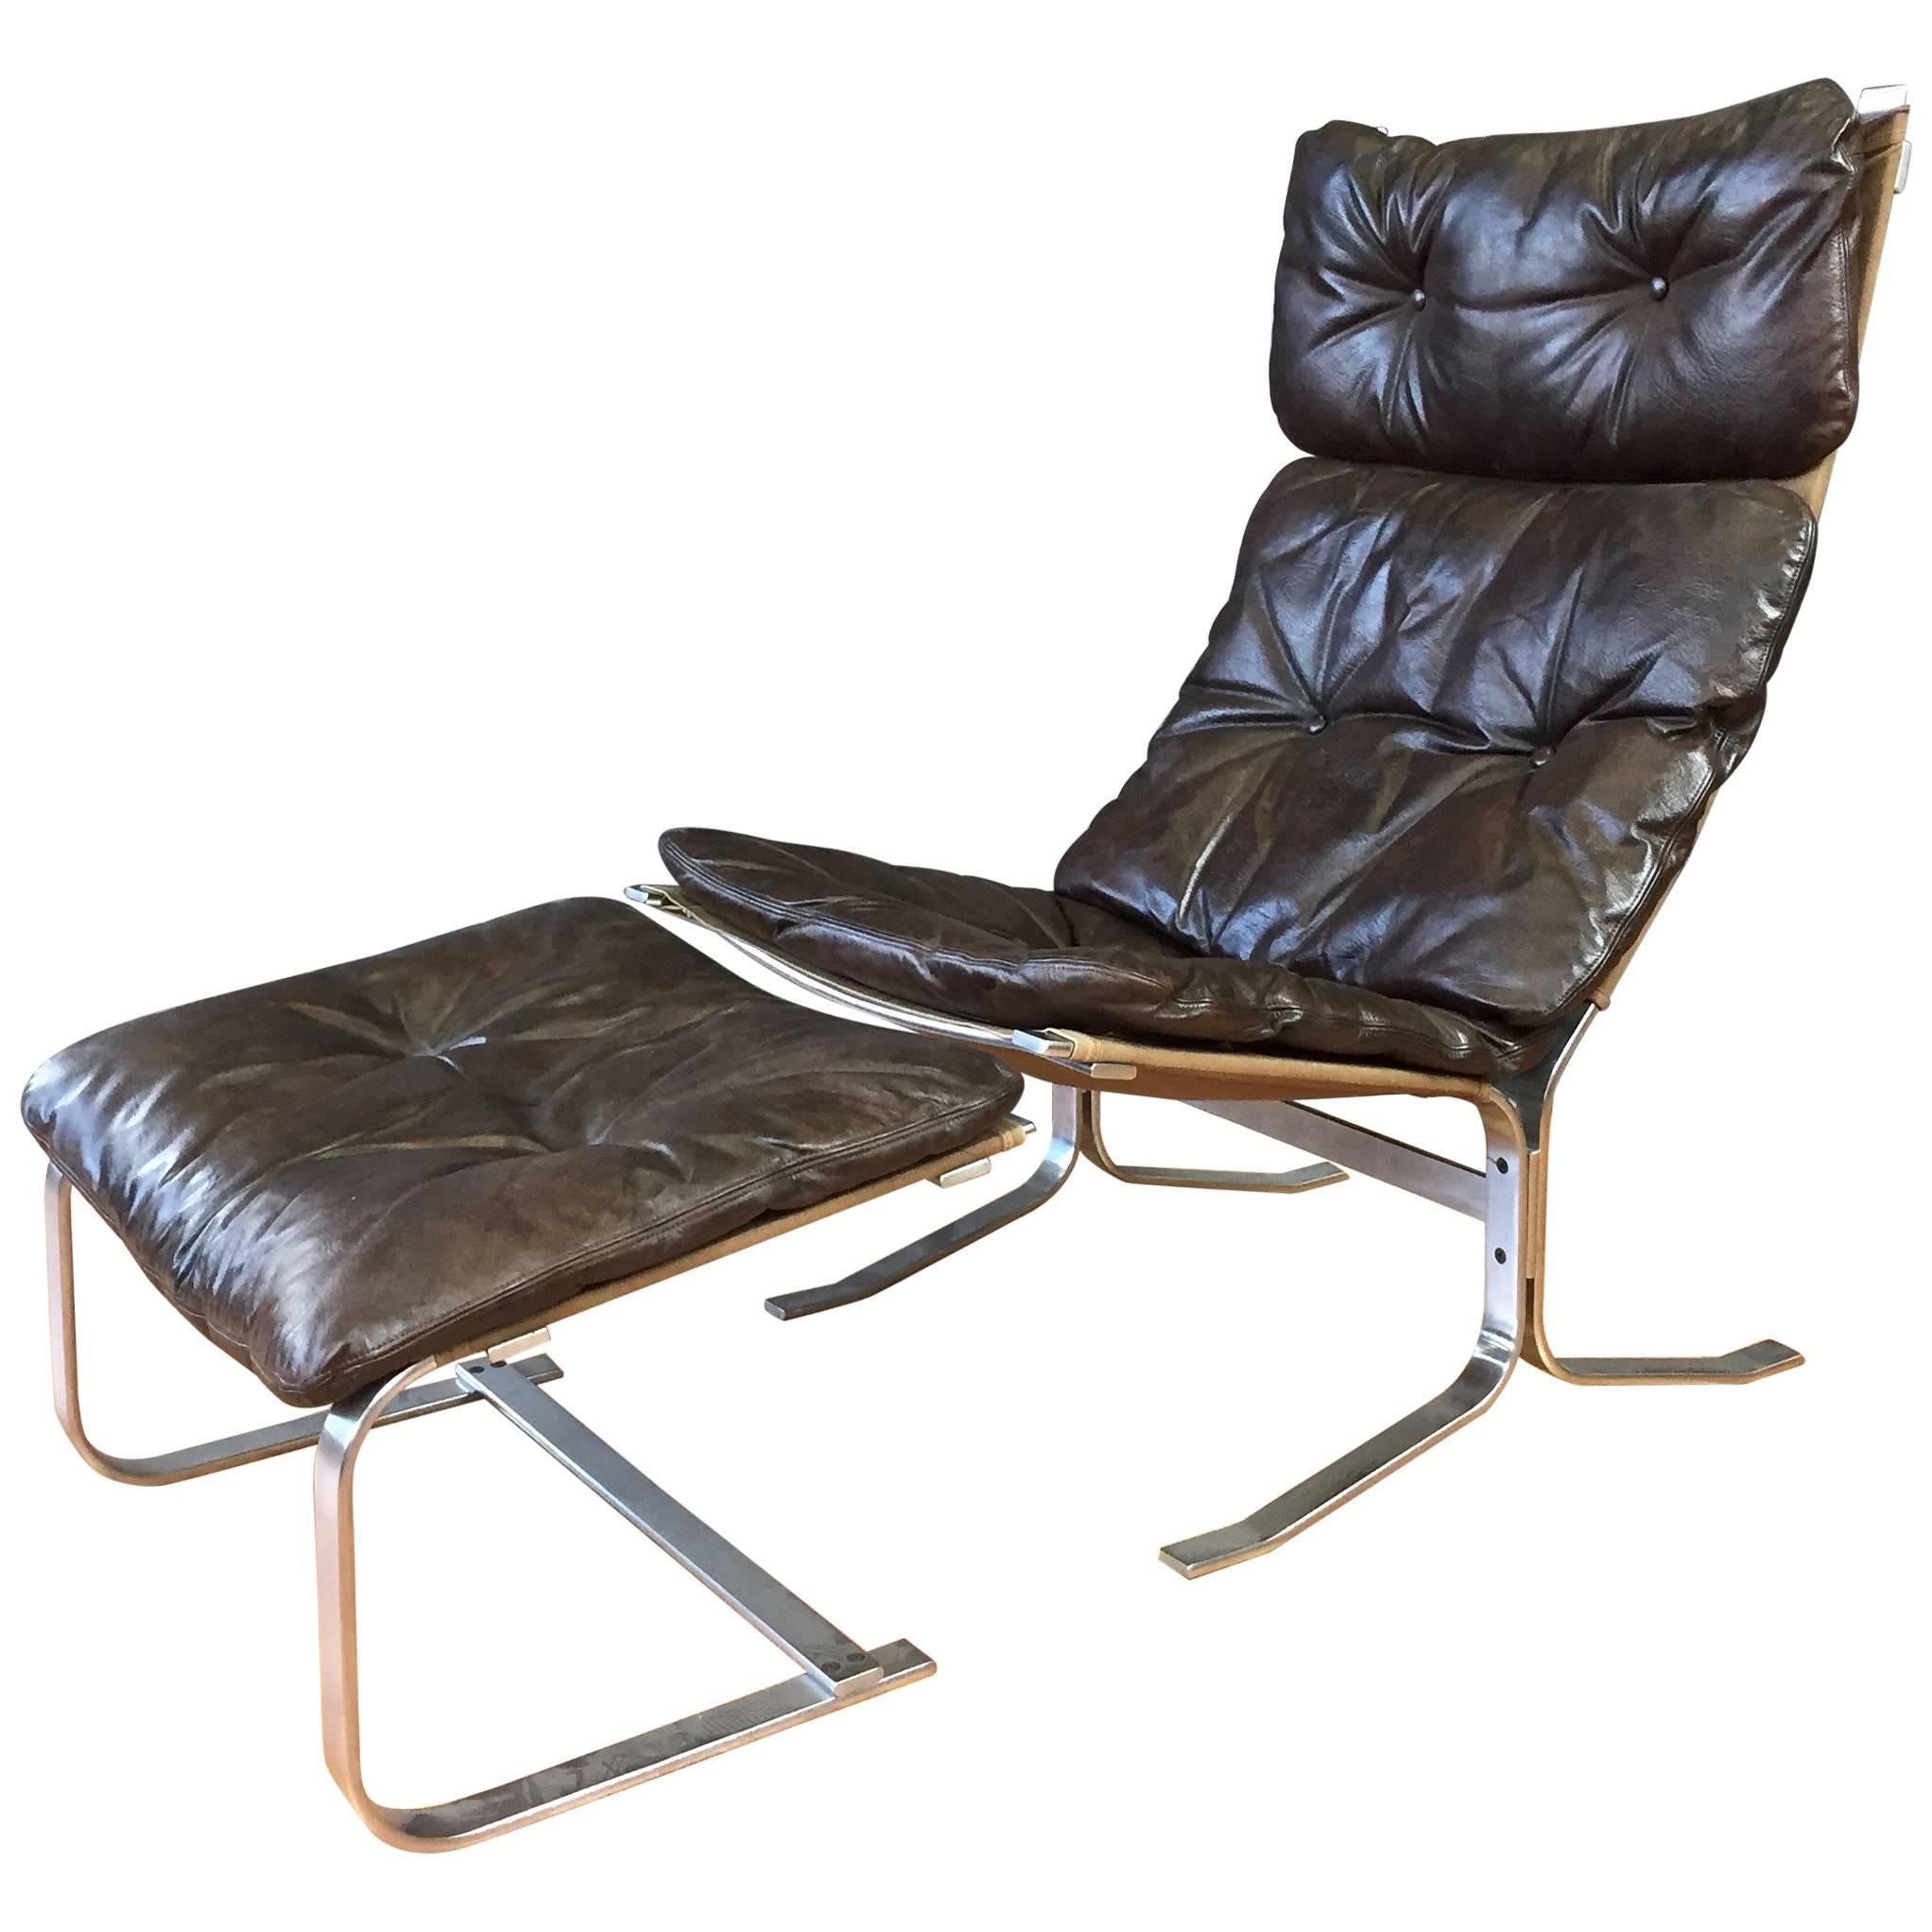 Rare Steel “Siesta” Chair and Ottoman by Ingmar Relling for Westnofa